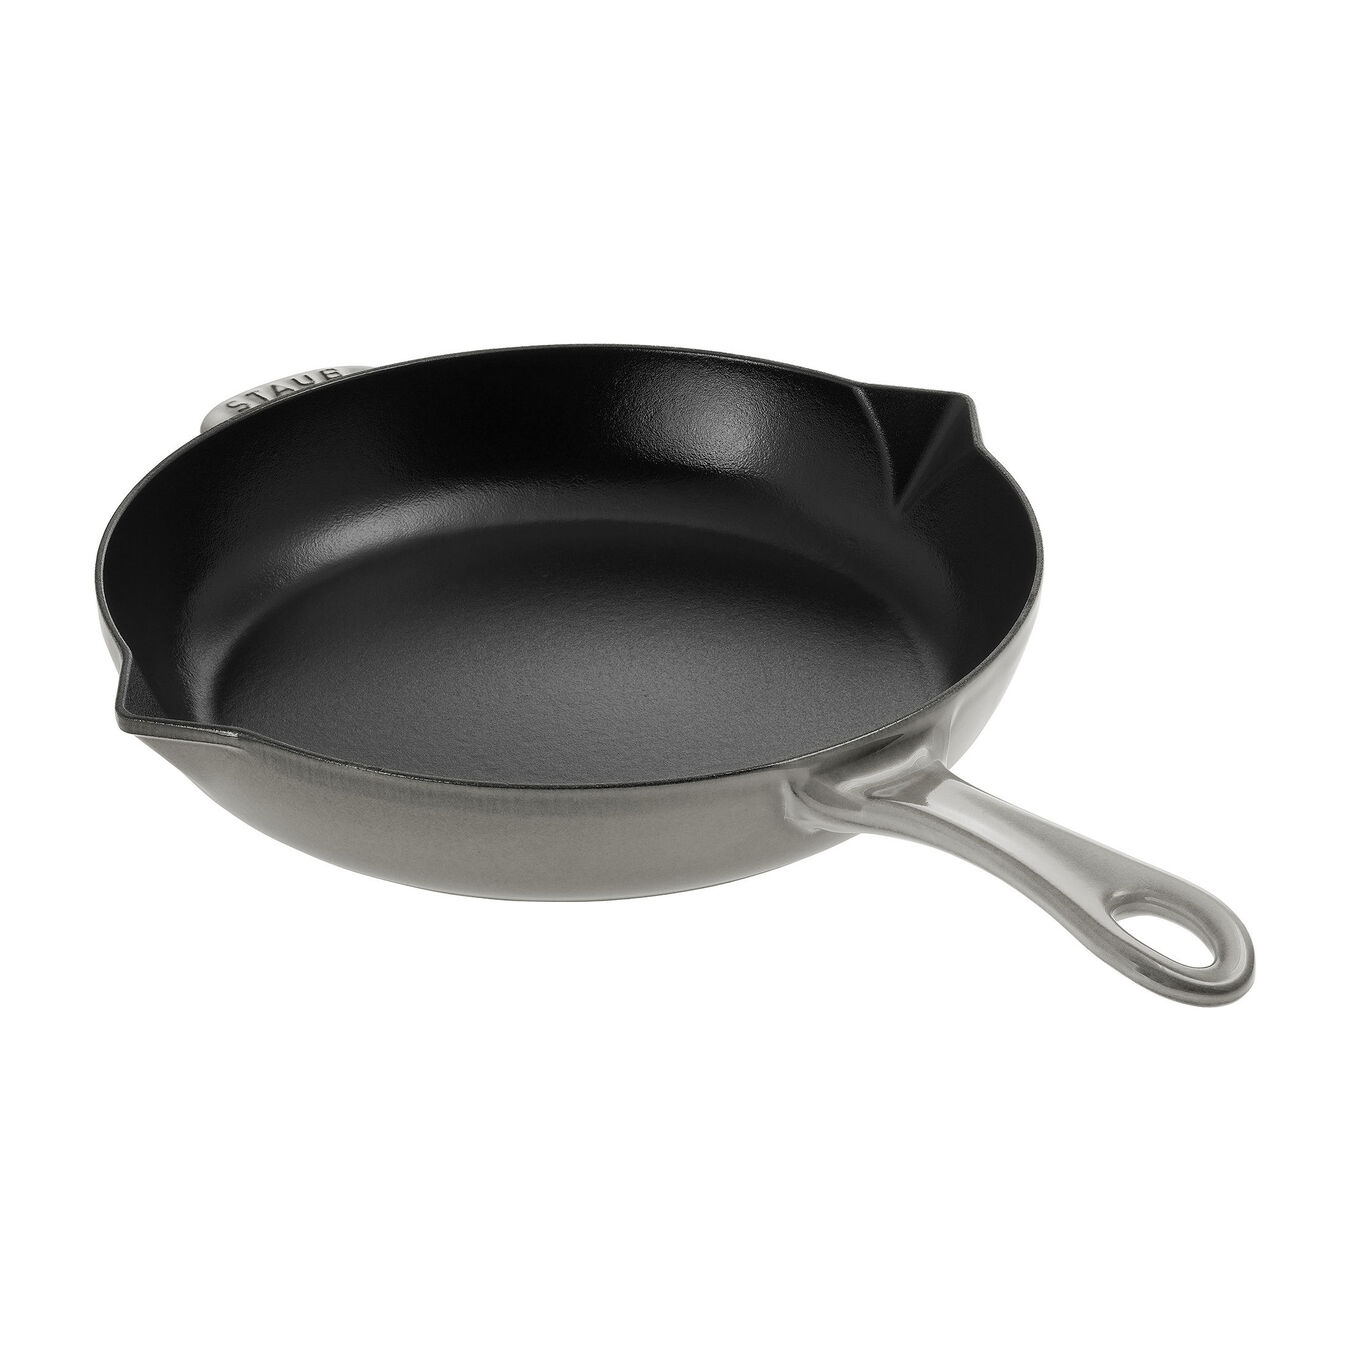 26 cm / 10 inch cast iron Frying pan with pouring spout, graphite-grey,,large 2